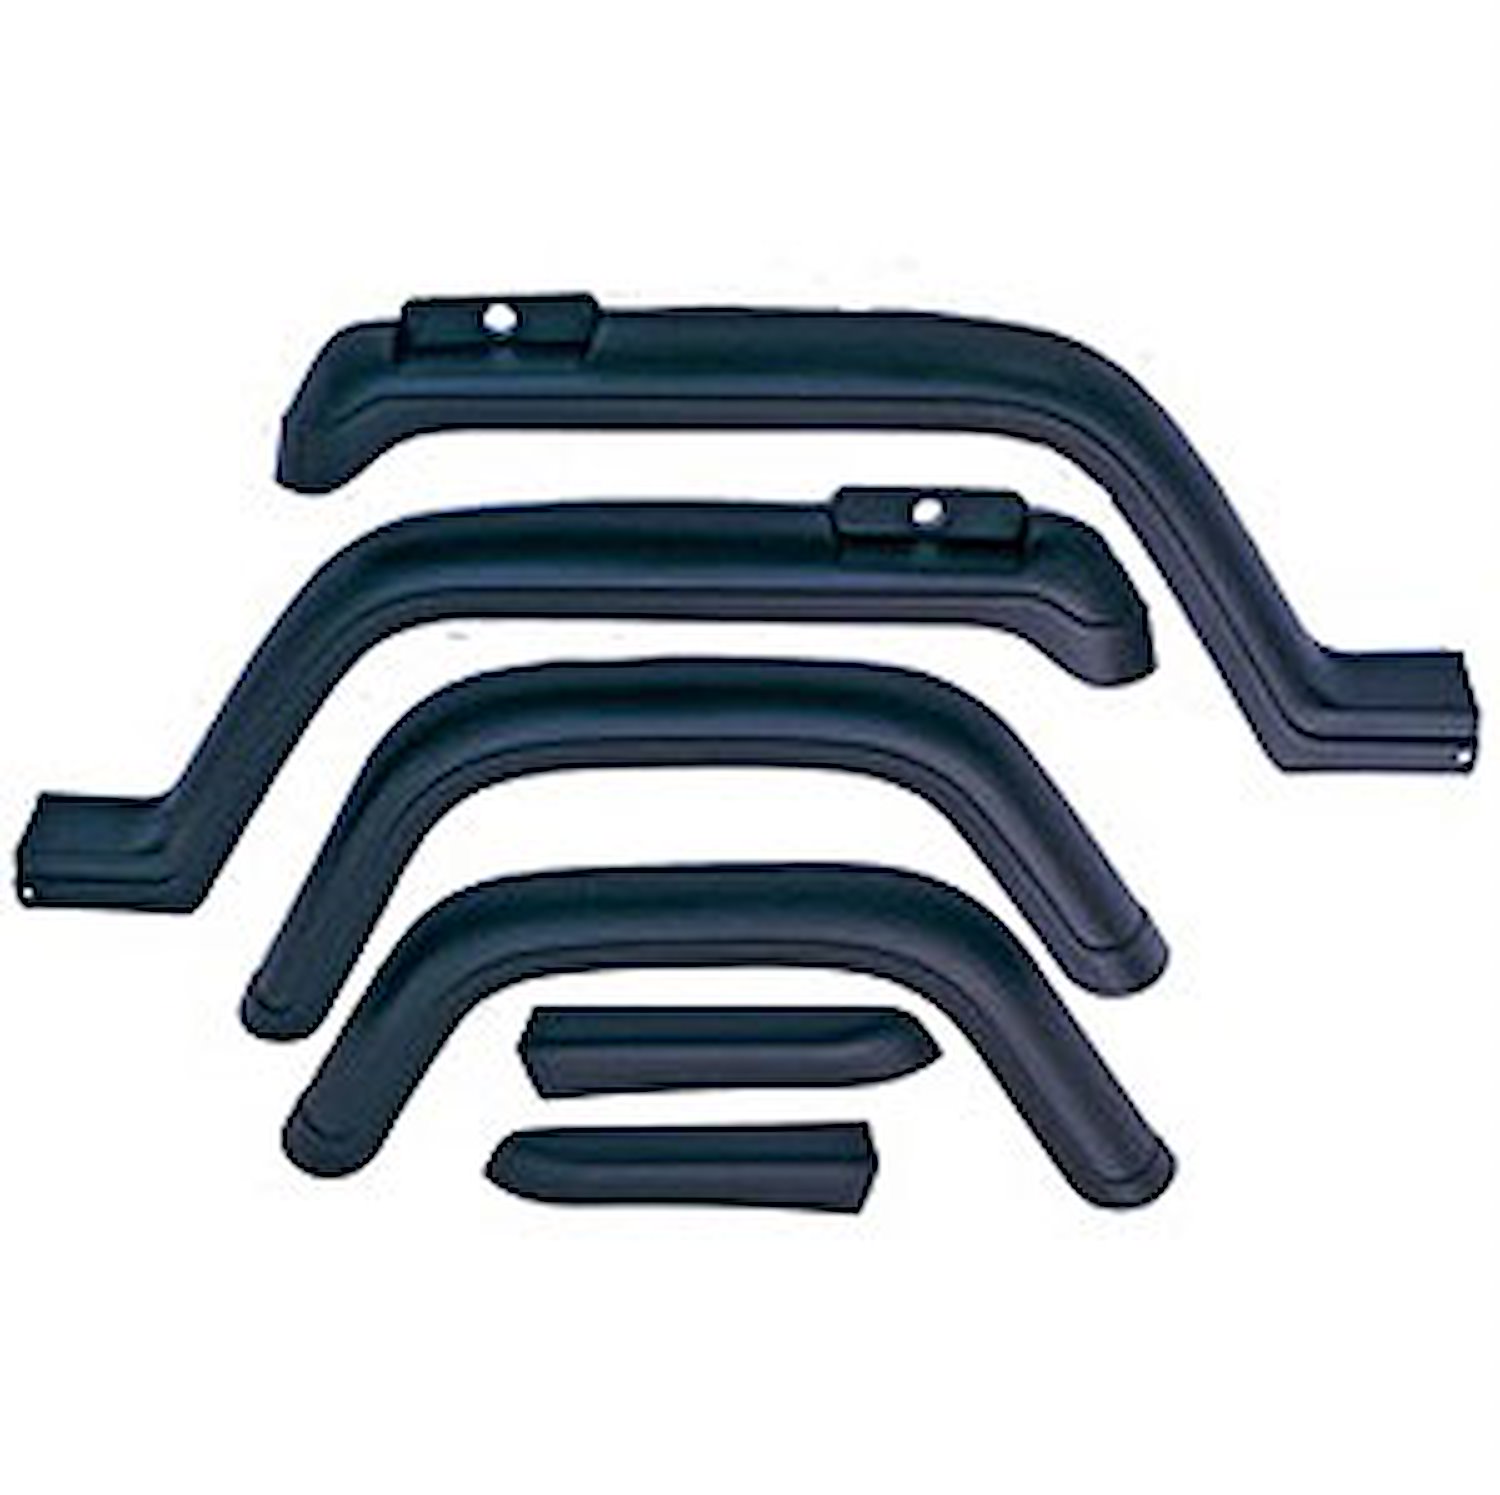 OE Style Fender Flare Kit for 1987-95 Jeep YJ Wrangler [6-Piece]